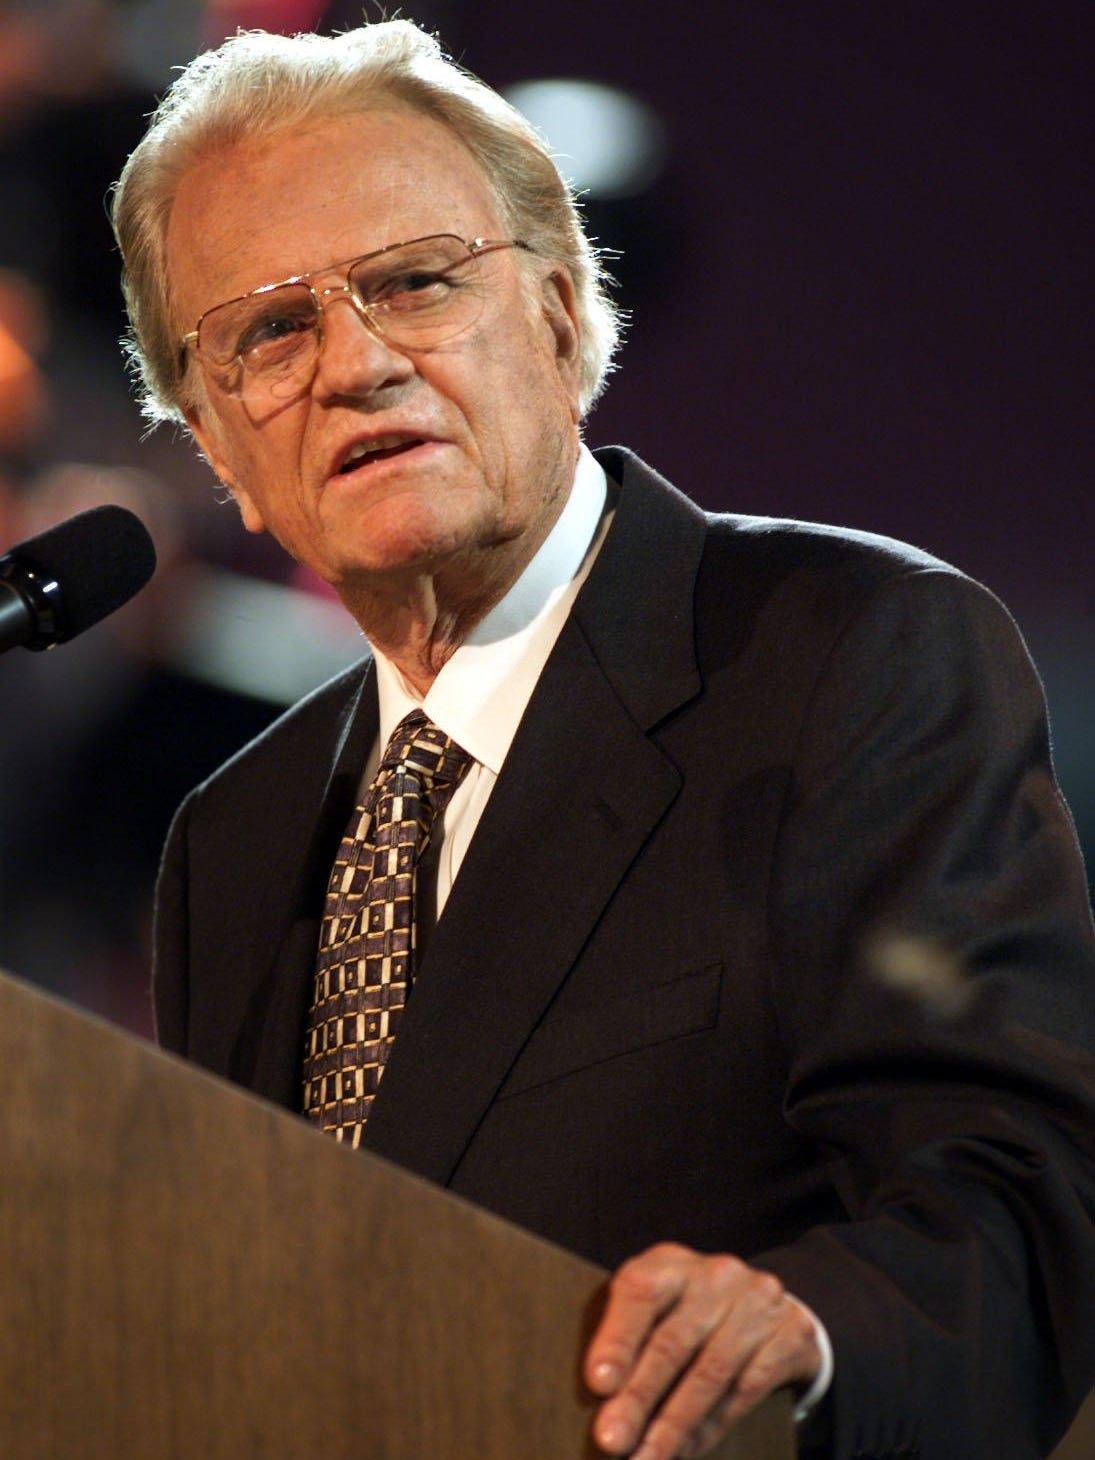 DOWNLOAD MP3: FINDING GOD'S WILL YOUR LIFE By Billy Graham (sermon) 18